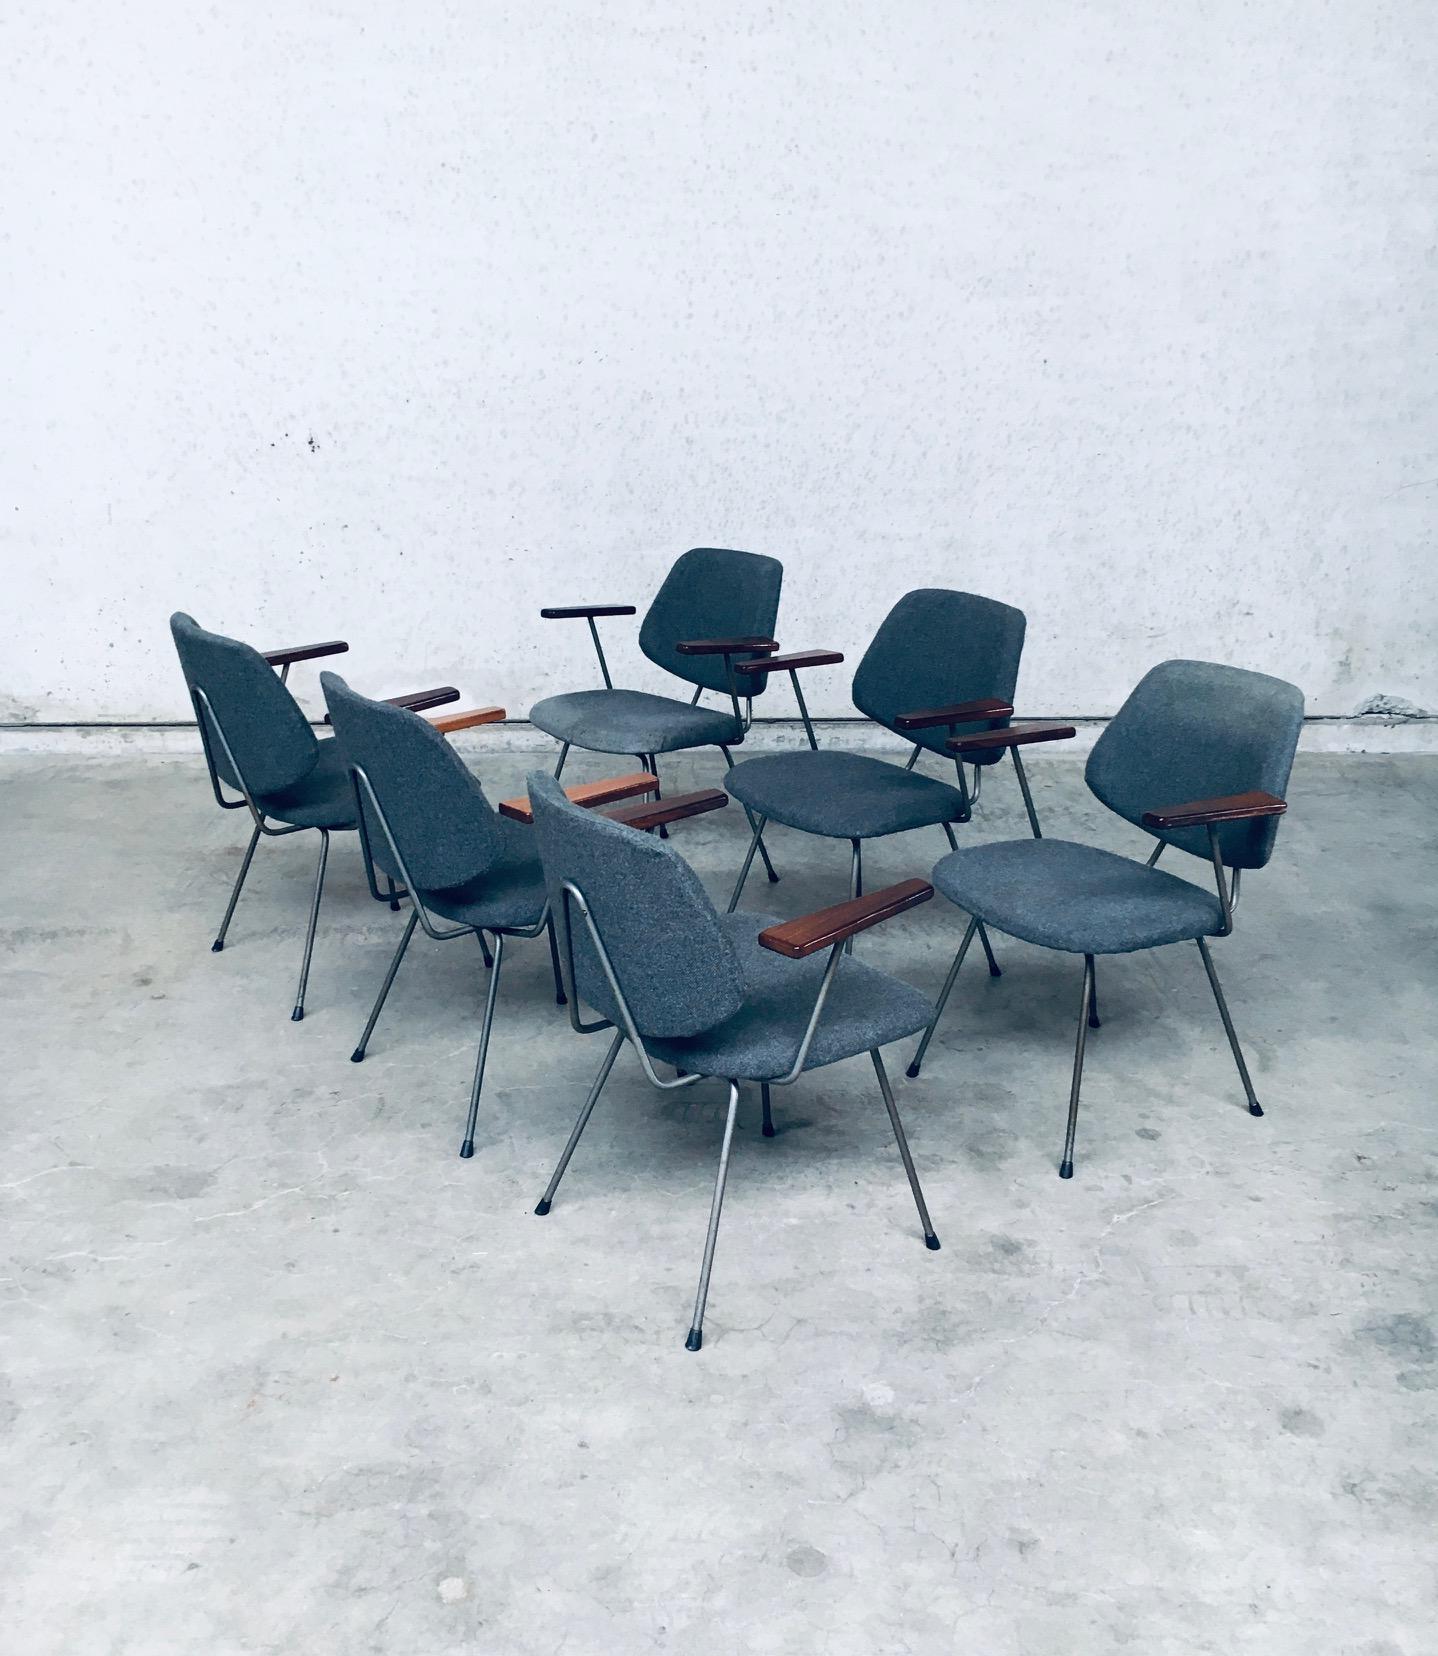 Dutch Midcentury Modern Design Office Chair set by Wim Rietveld for Kembo, 1950's For Sale